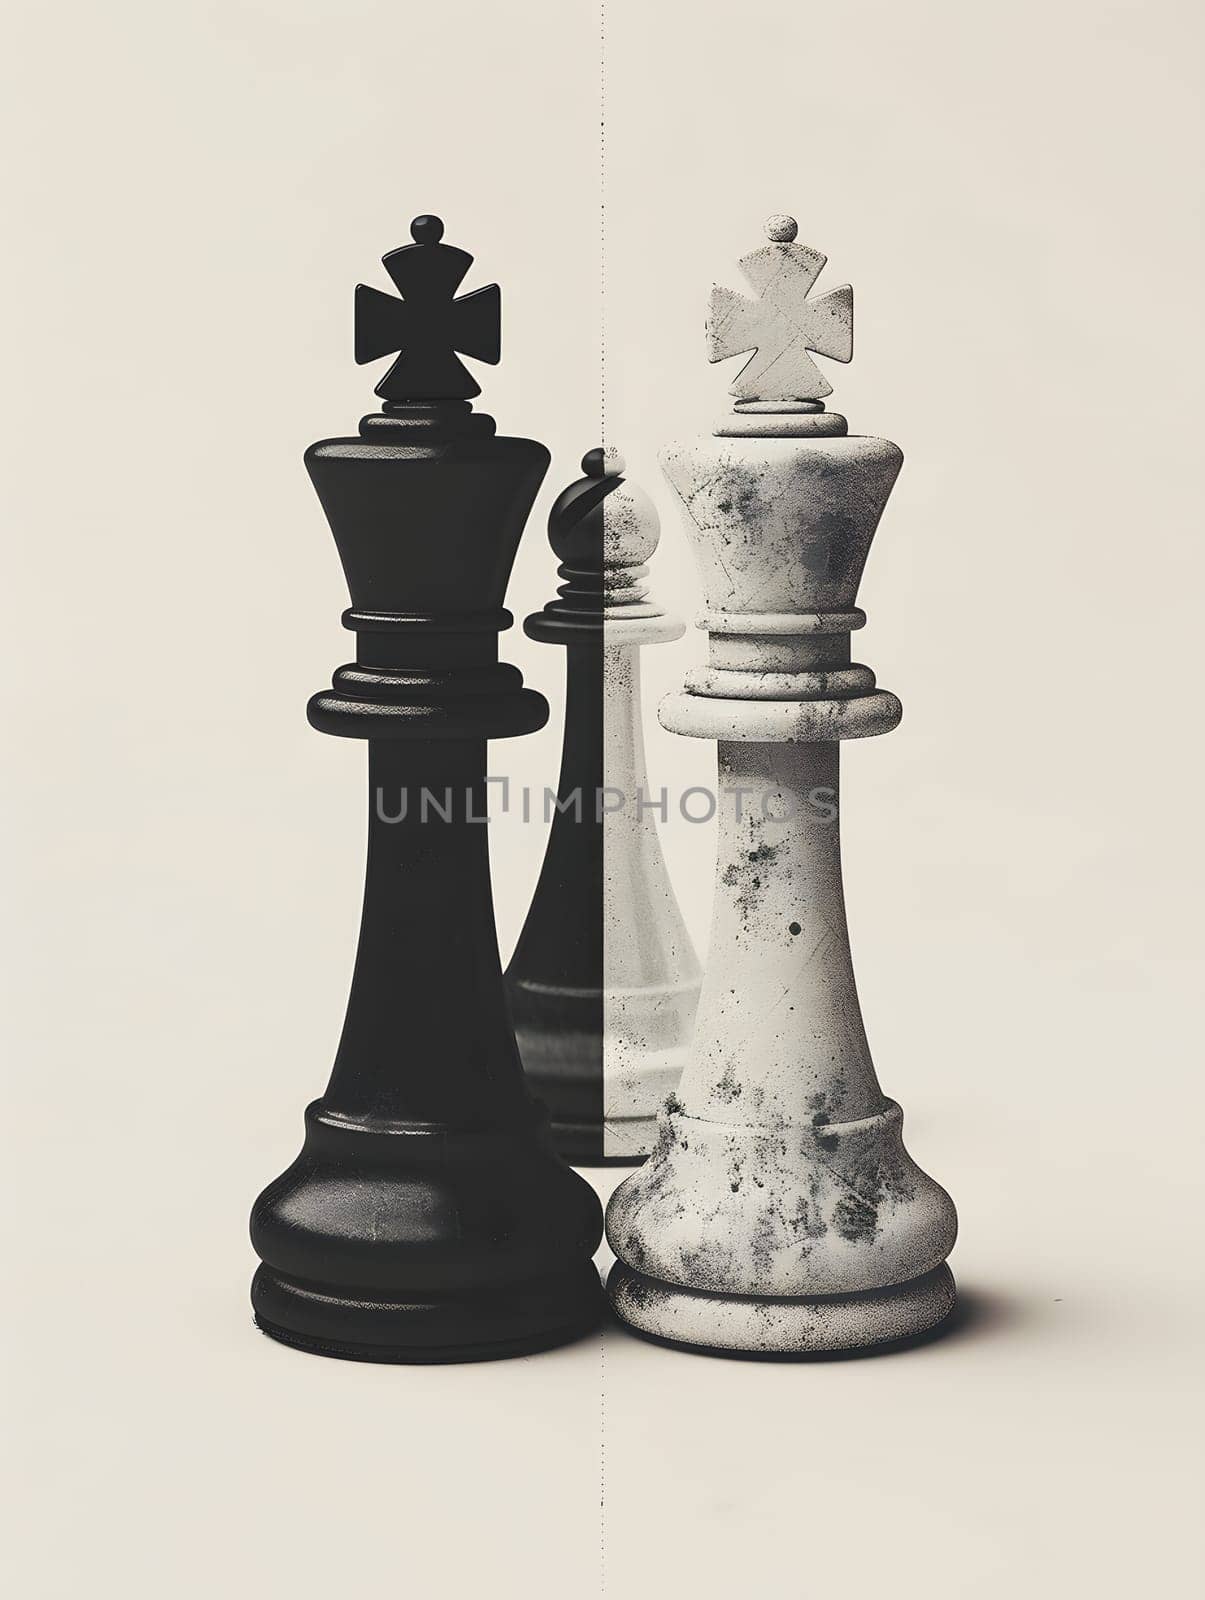 A still life photograph depicting two chess pieces standing next to each other on a chessboard. Indoor games and sports, tabletop game, composite material, and recreation themes